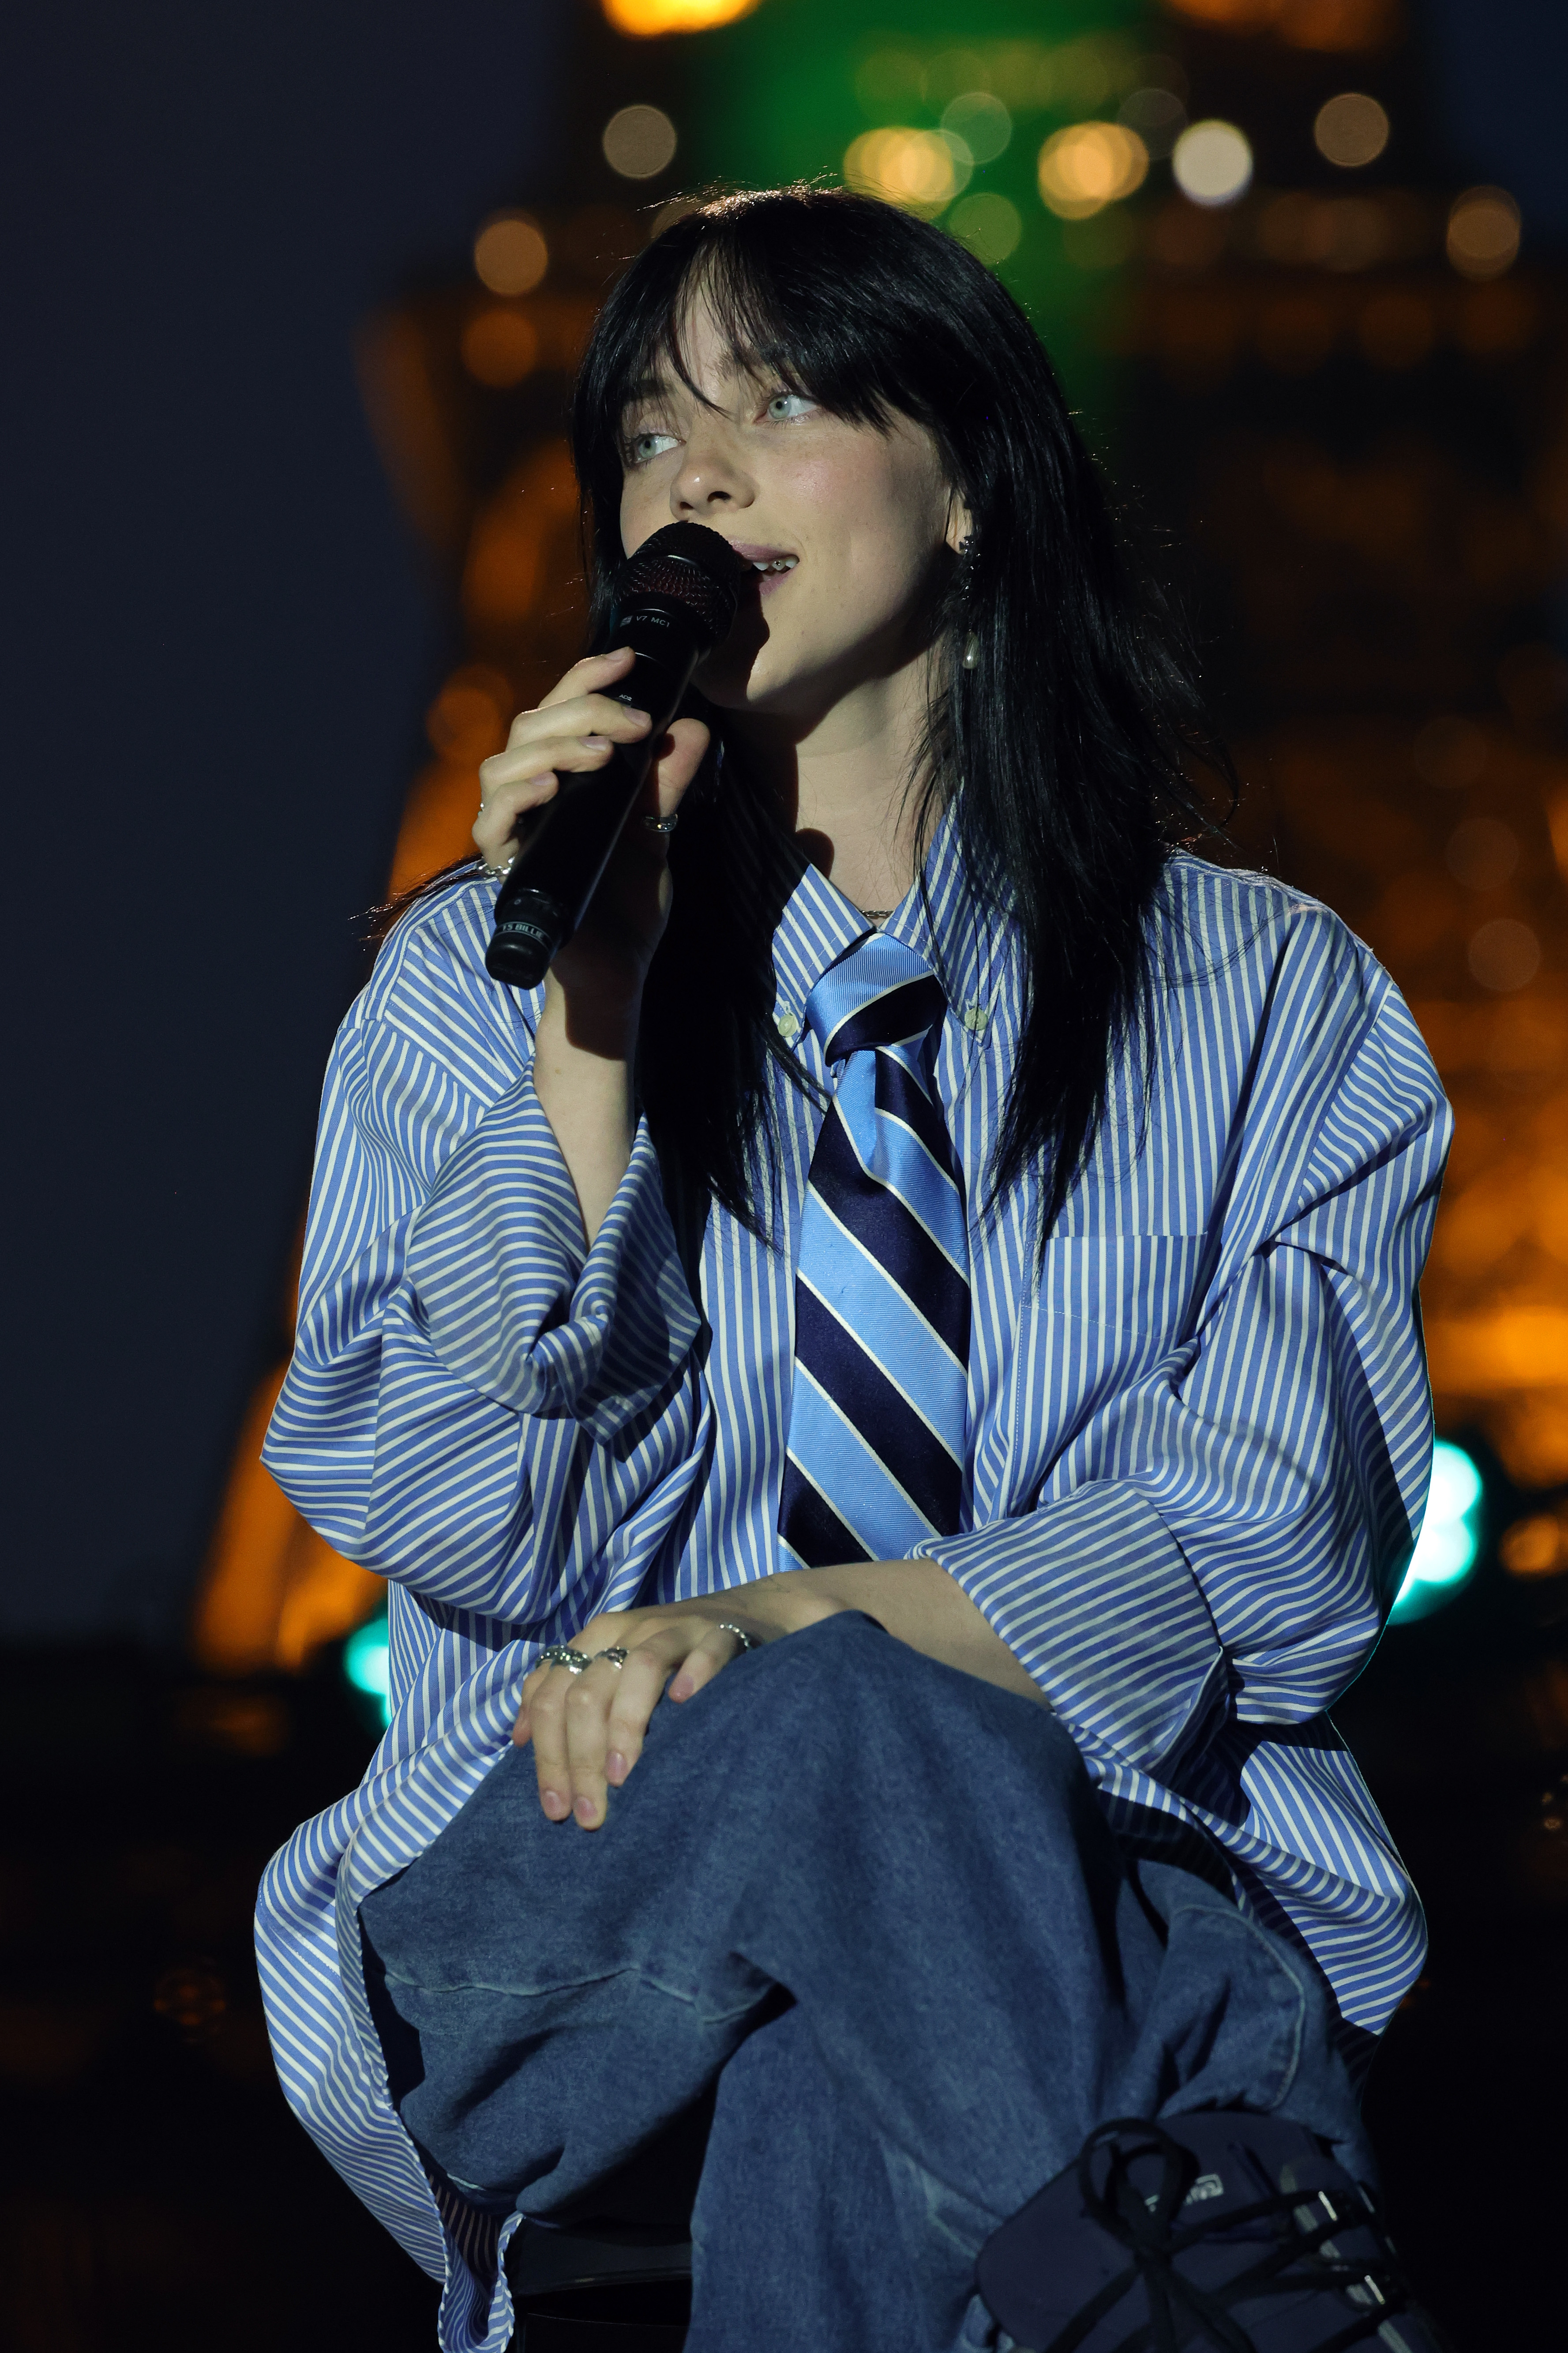 Billie Eilish performing, wearing a striped shirt with a necktie and holding a microphone